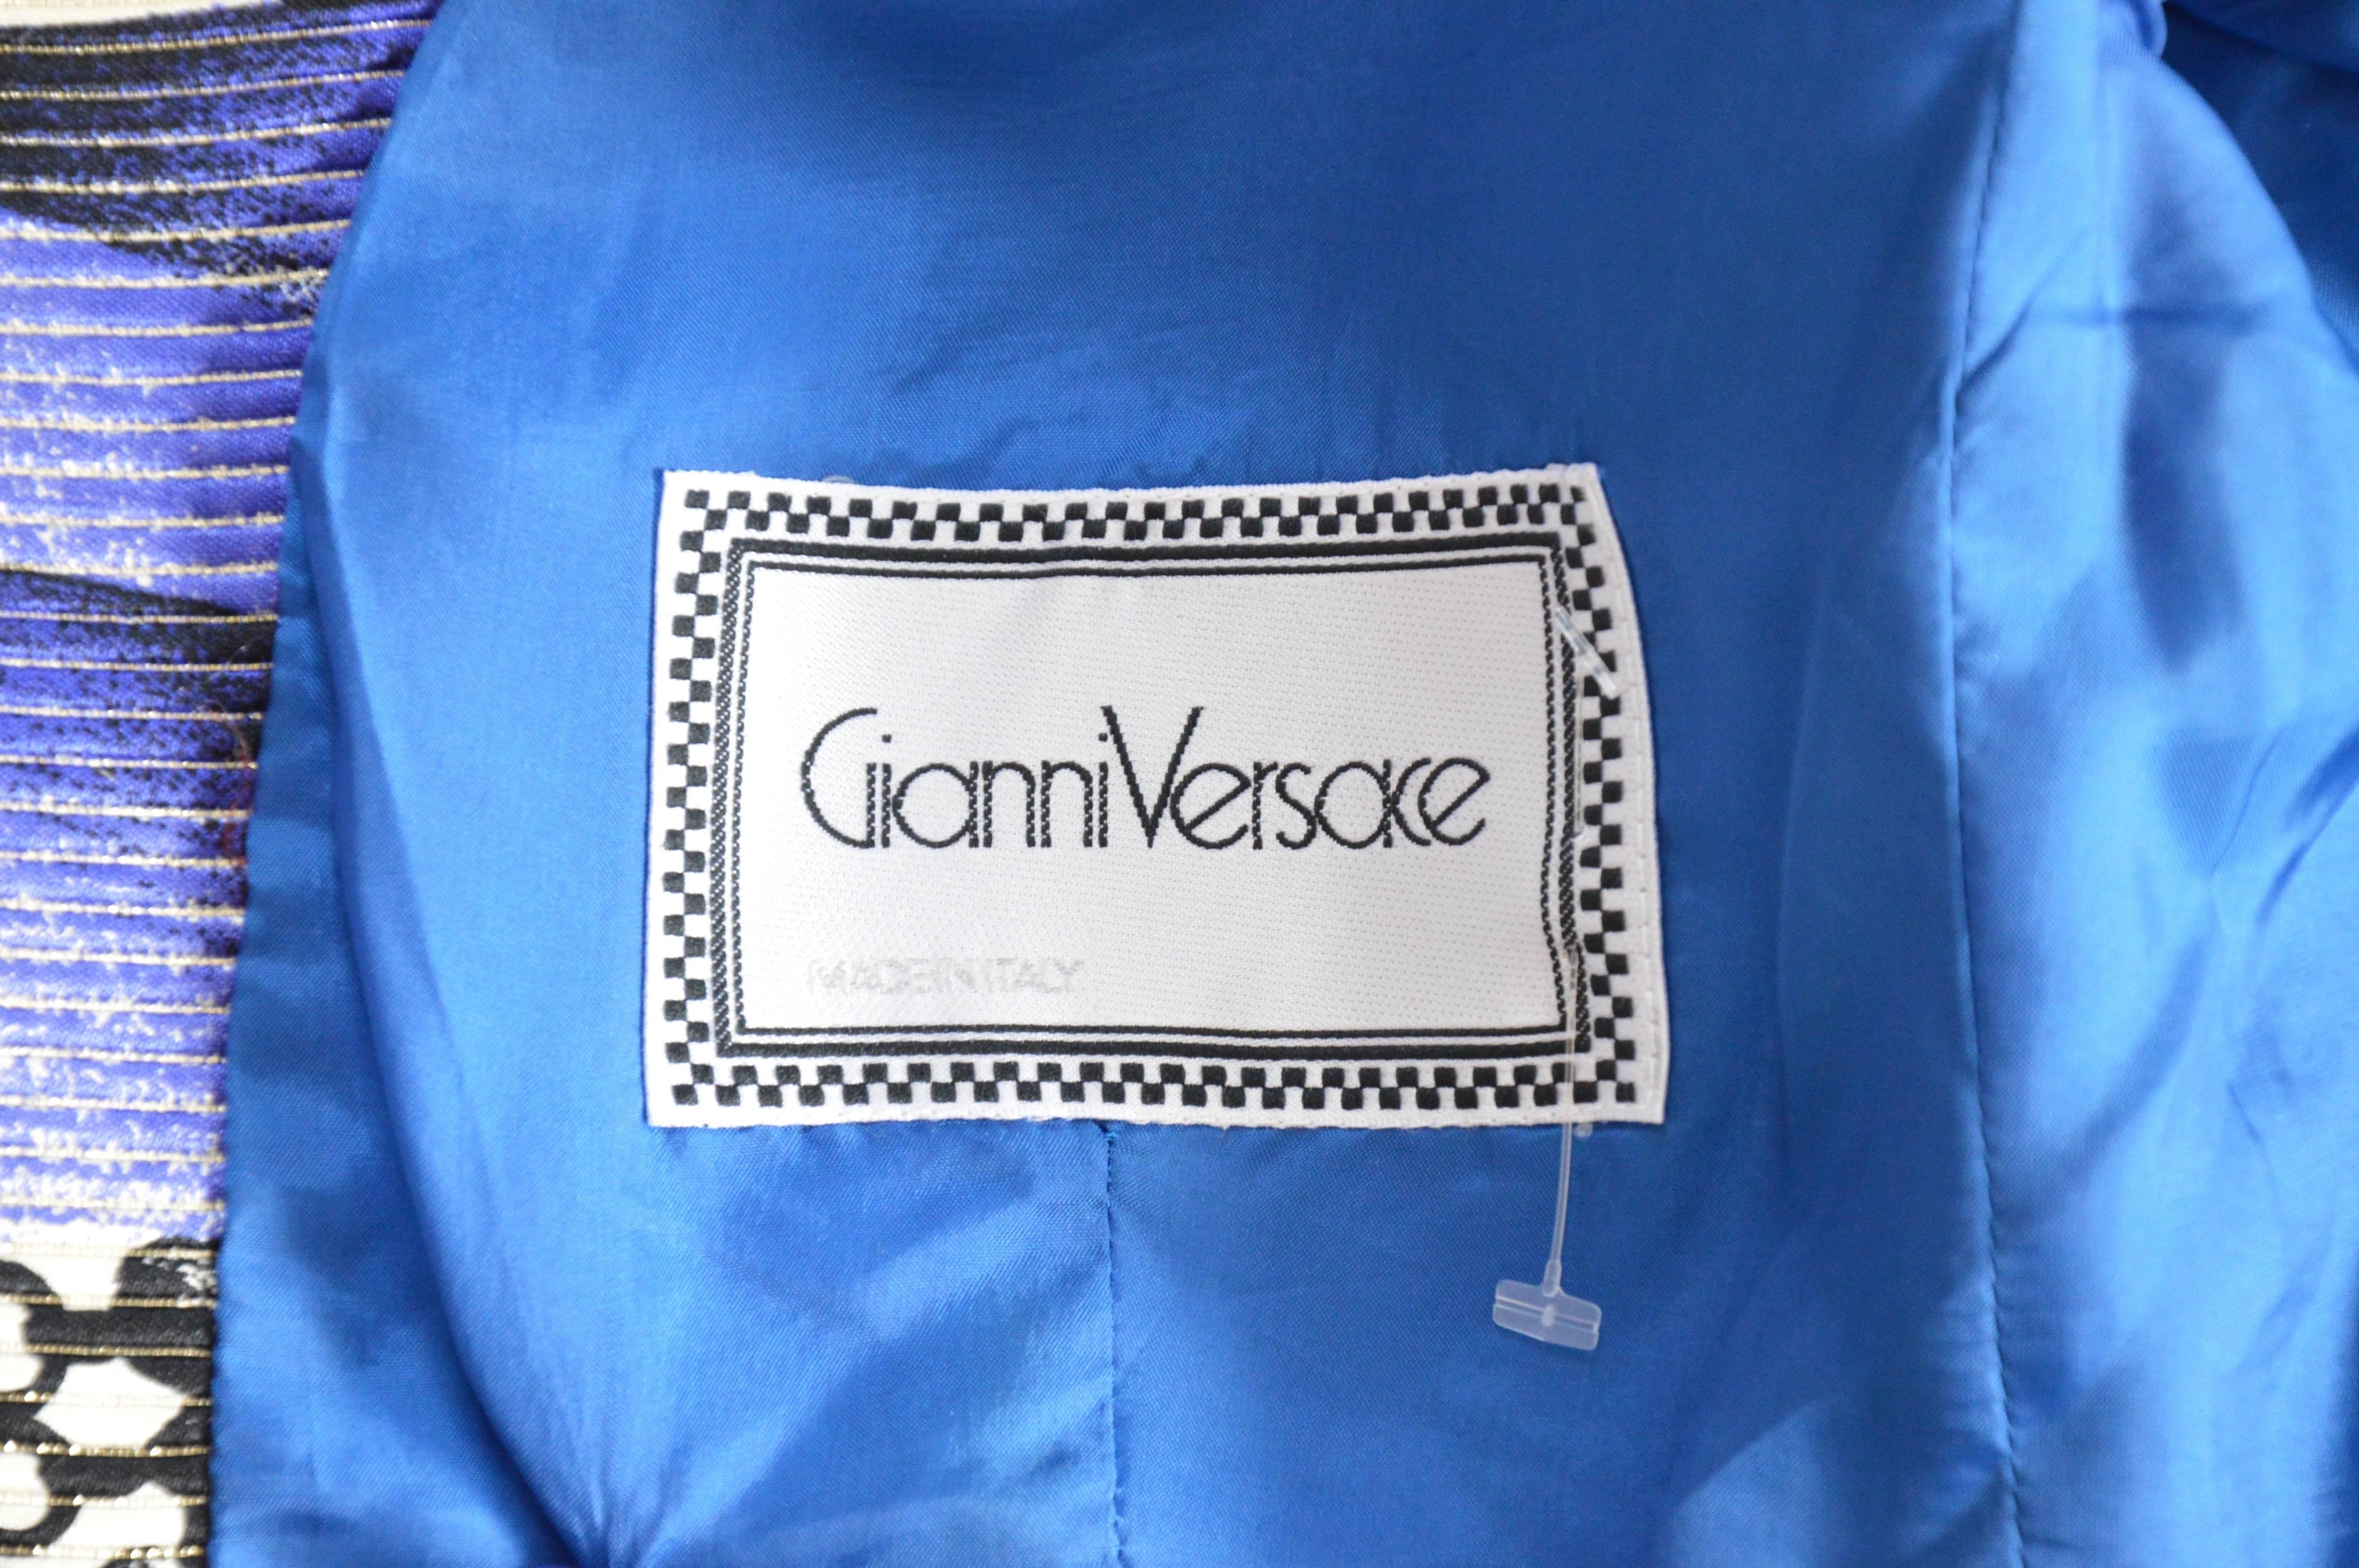 1991 Gianni Versace Graffiti Colorful Skirt Suit Inspired by Chagall's Works 4